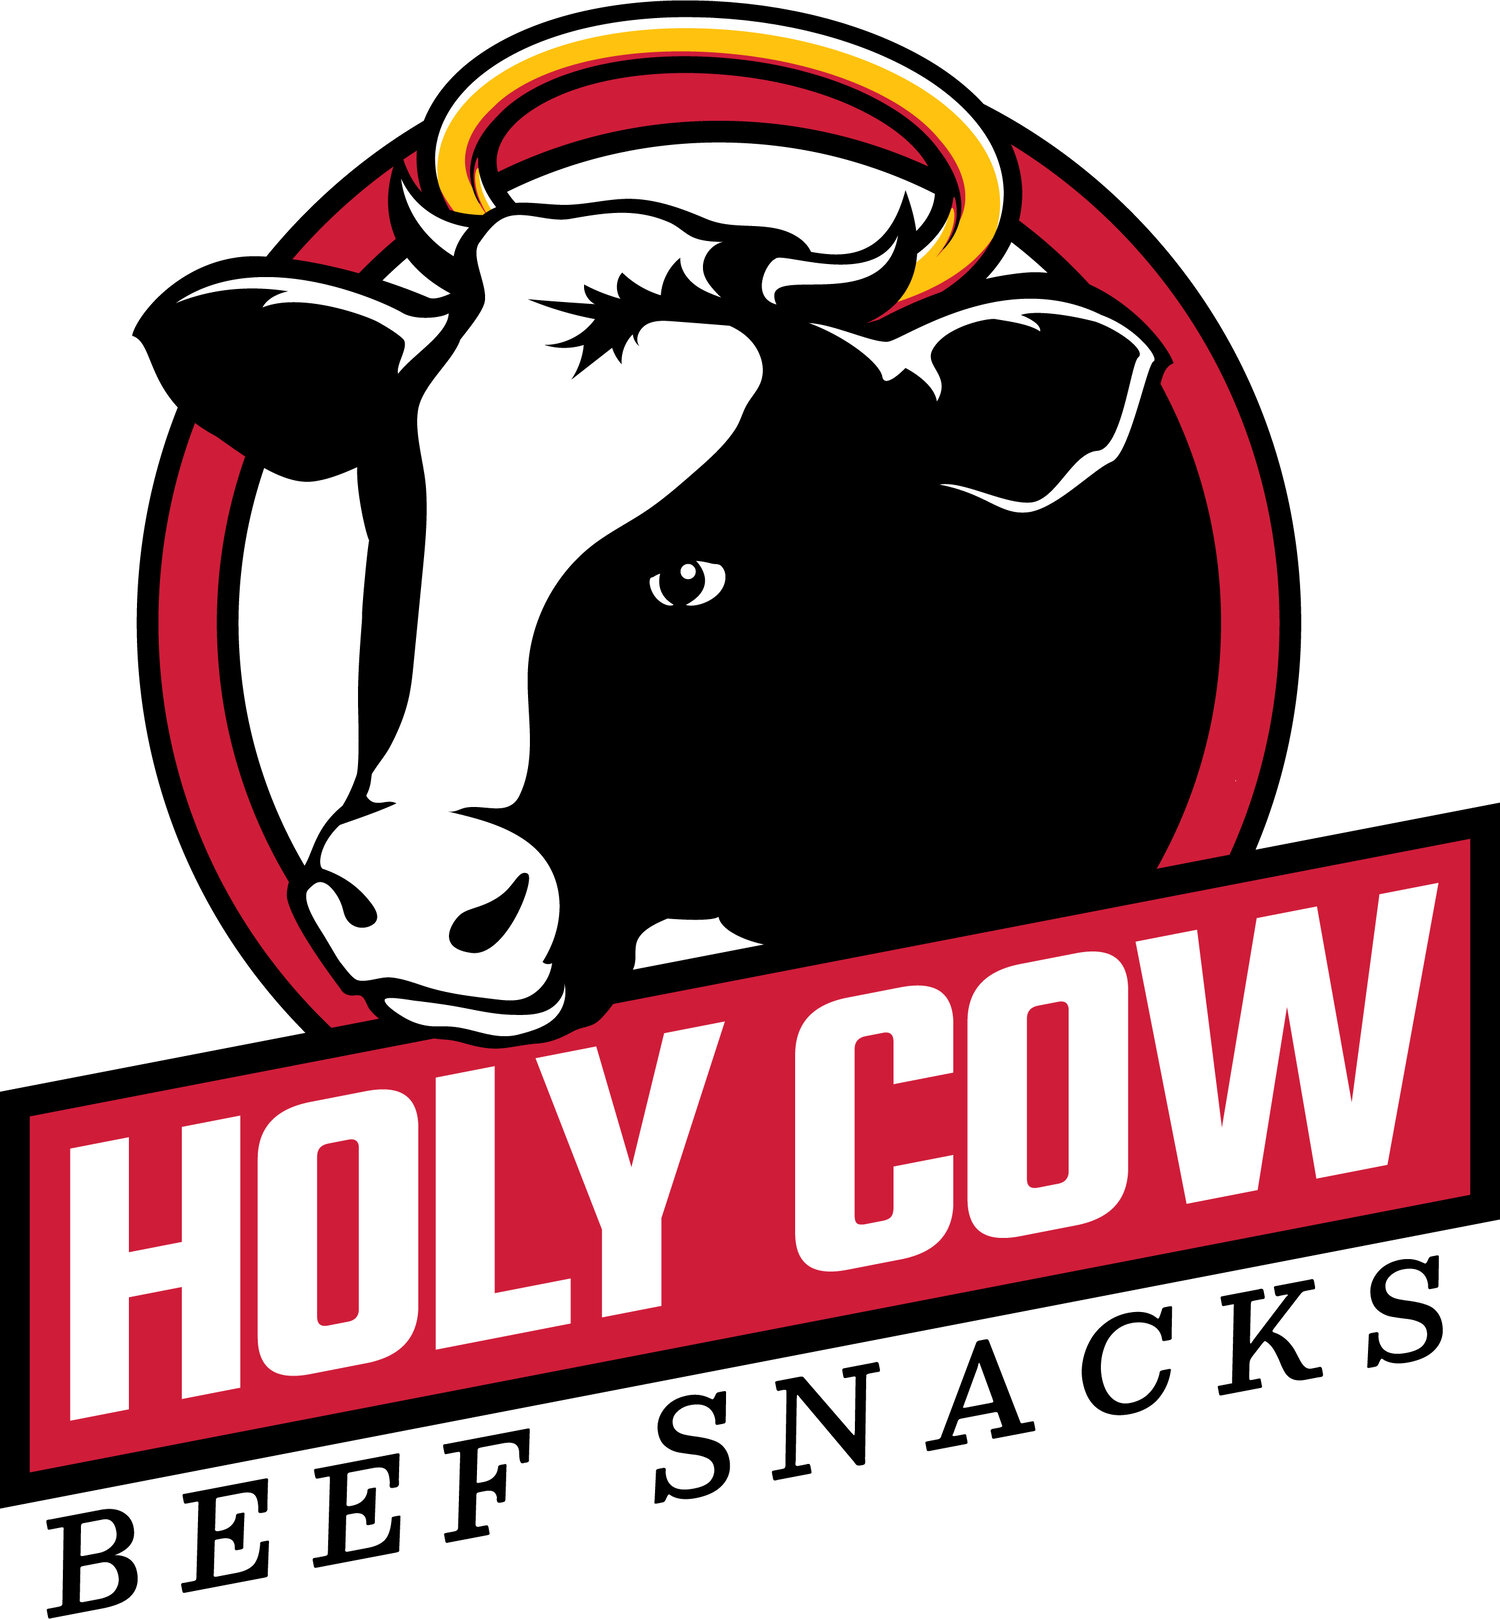 Holy Cow Beef Snacks